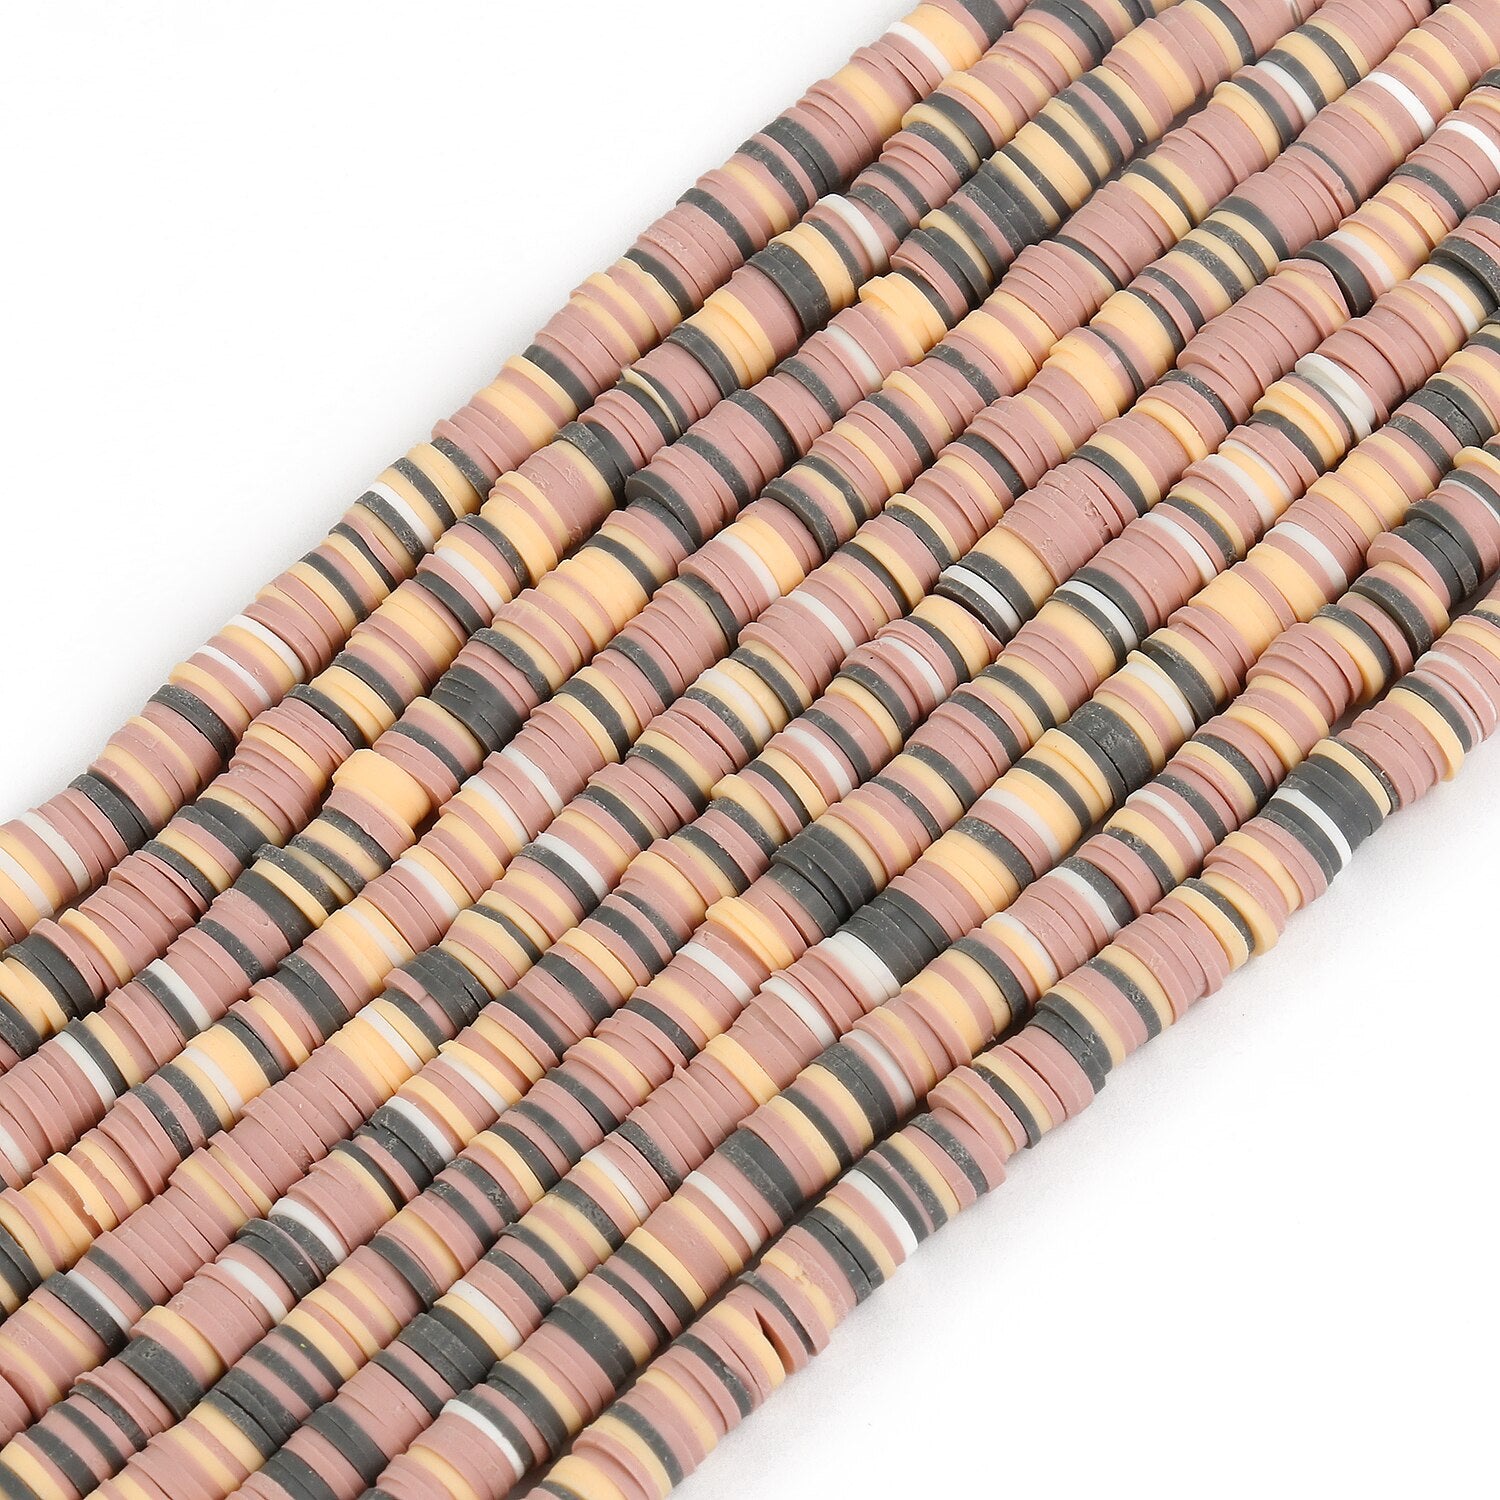 Get Creative with 300-320pcs of Boho African Disc Soft Clay Beads - Flexi Africa - Flexi Africa offers Free Delivery Worldwide - Vibrant African traditional clothing showcasing bold prints and intricate designs